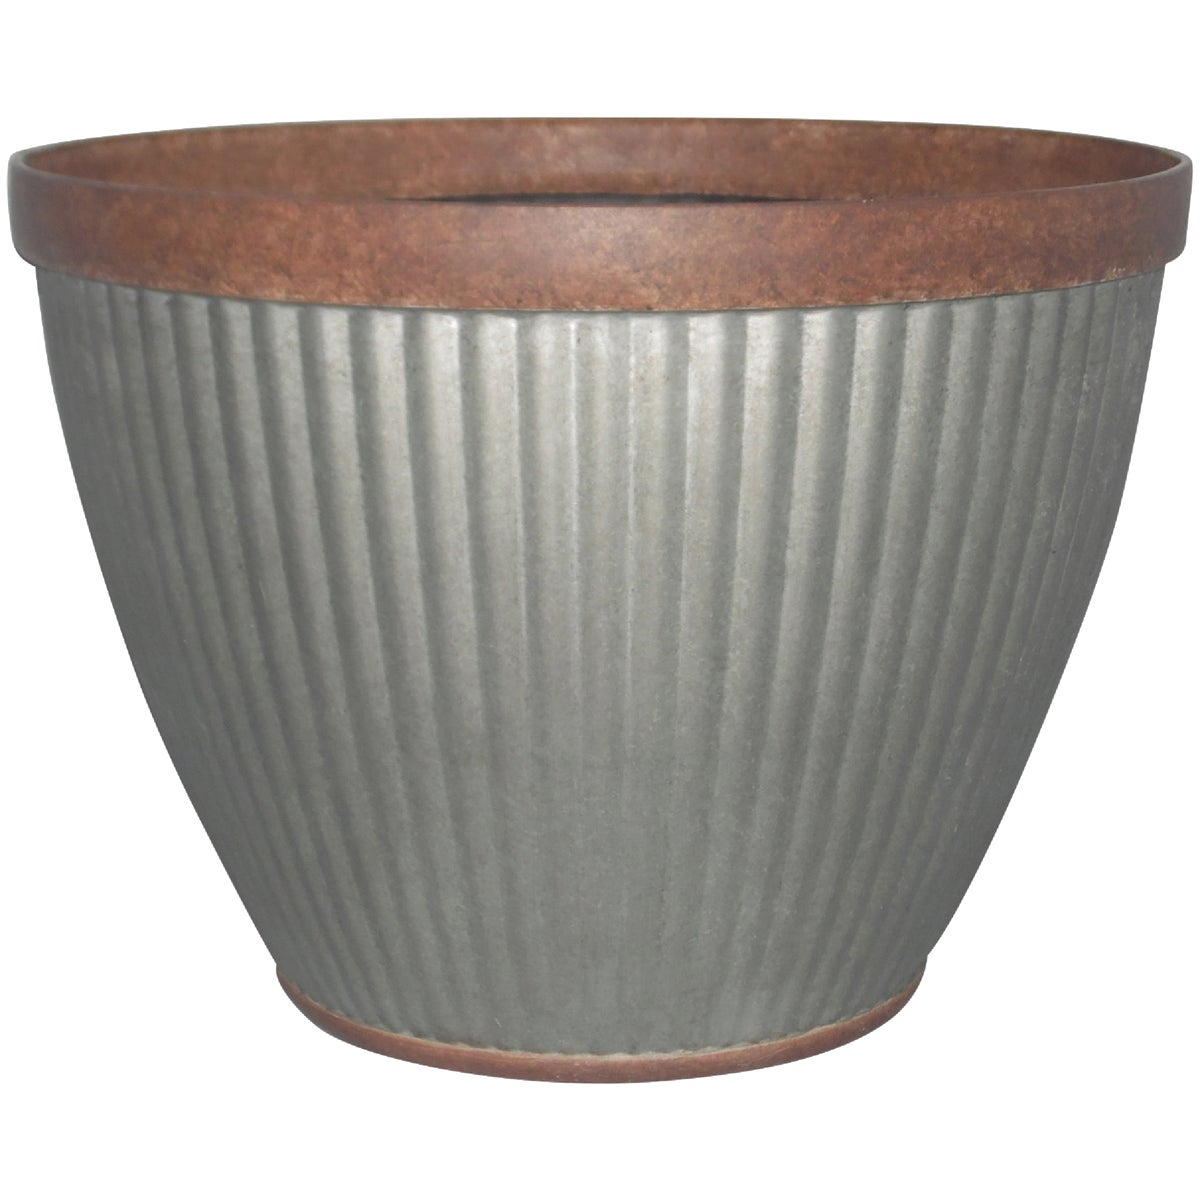 Southern Patio Westlake 15 In. x 11 In. Resin Rustic Galvanized Round Planter